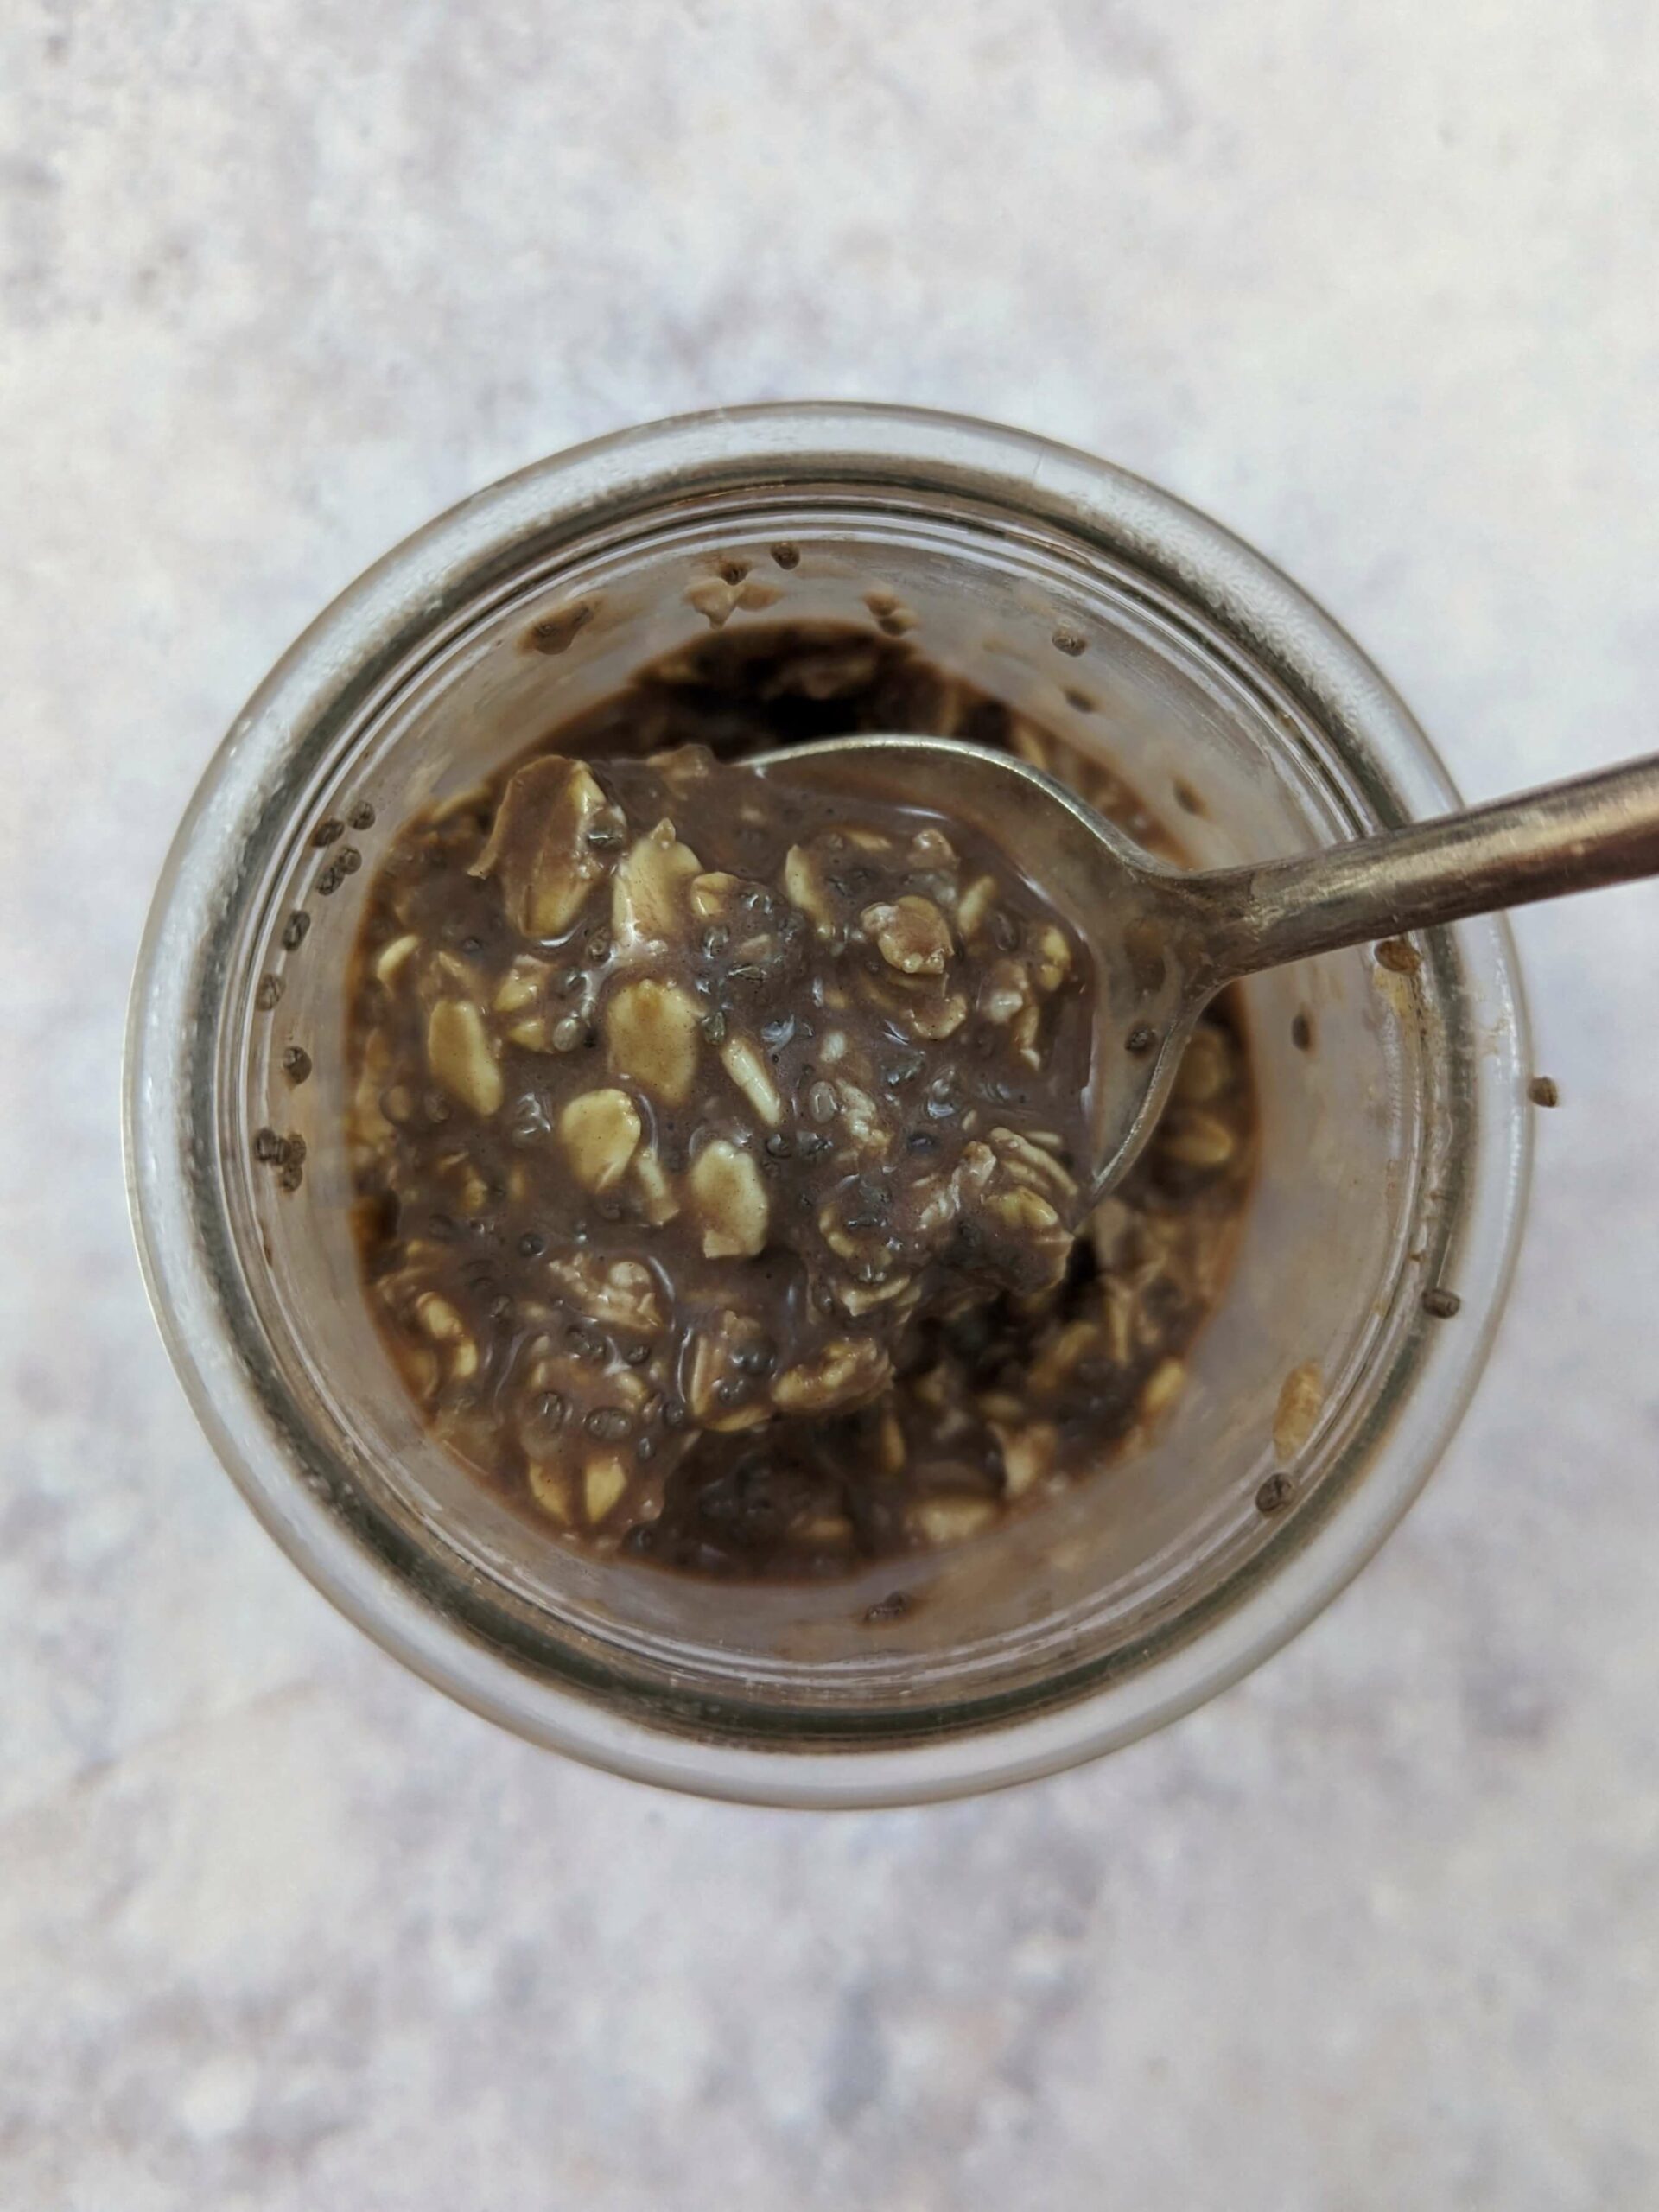 An overhead view of protein overnight oats without any toppings.